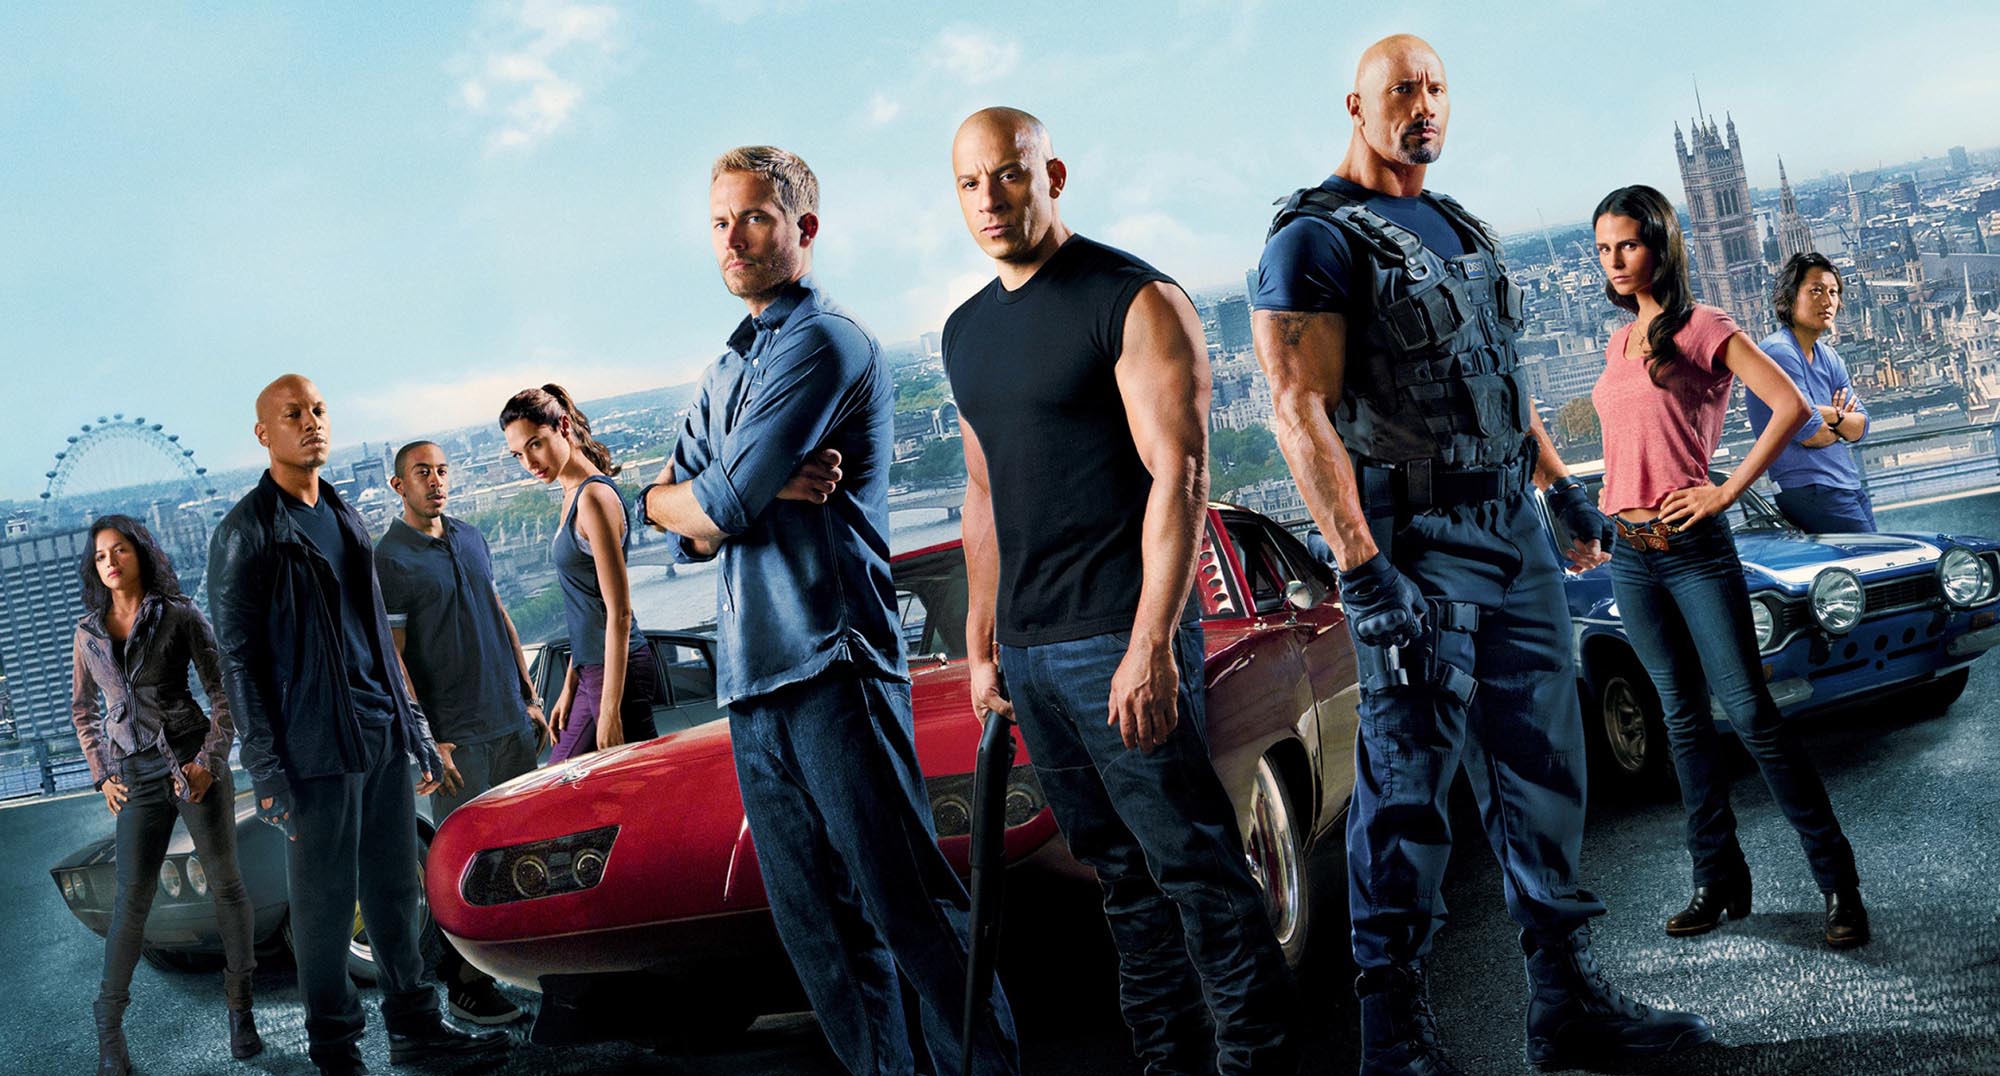 Ahead of Netflix's new animated series 'Fast & Furious: Spy Racers', here’s a ranking of our 10 favorite tropes that make the movies so damn terrific.